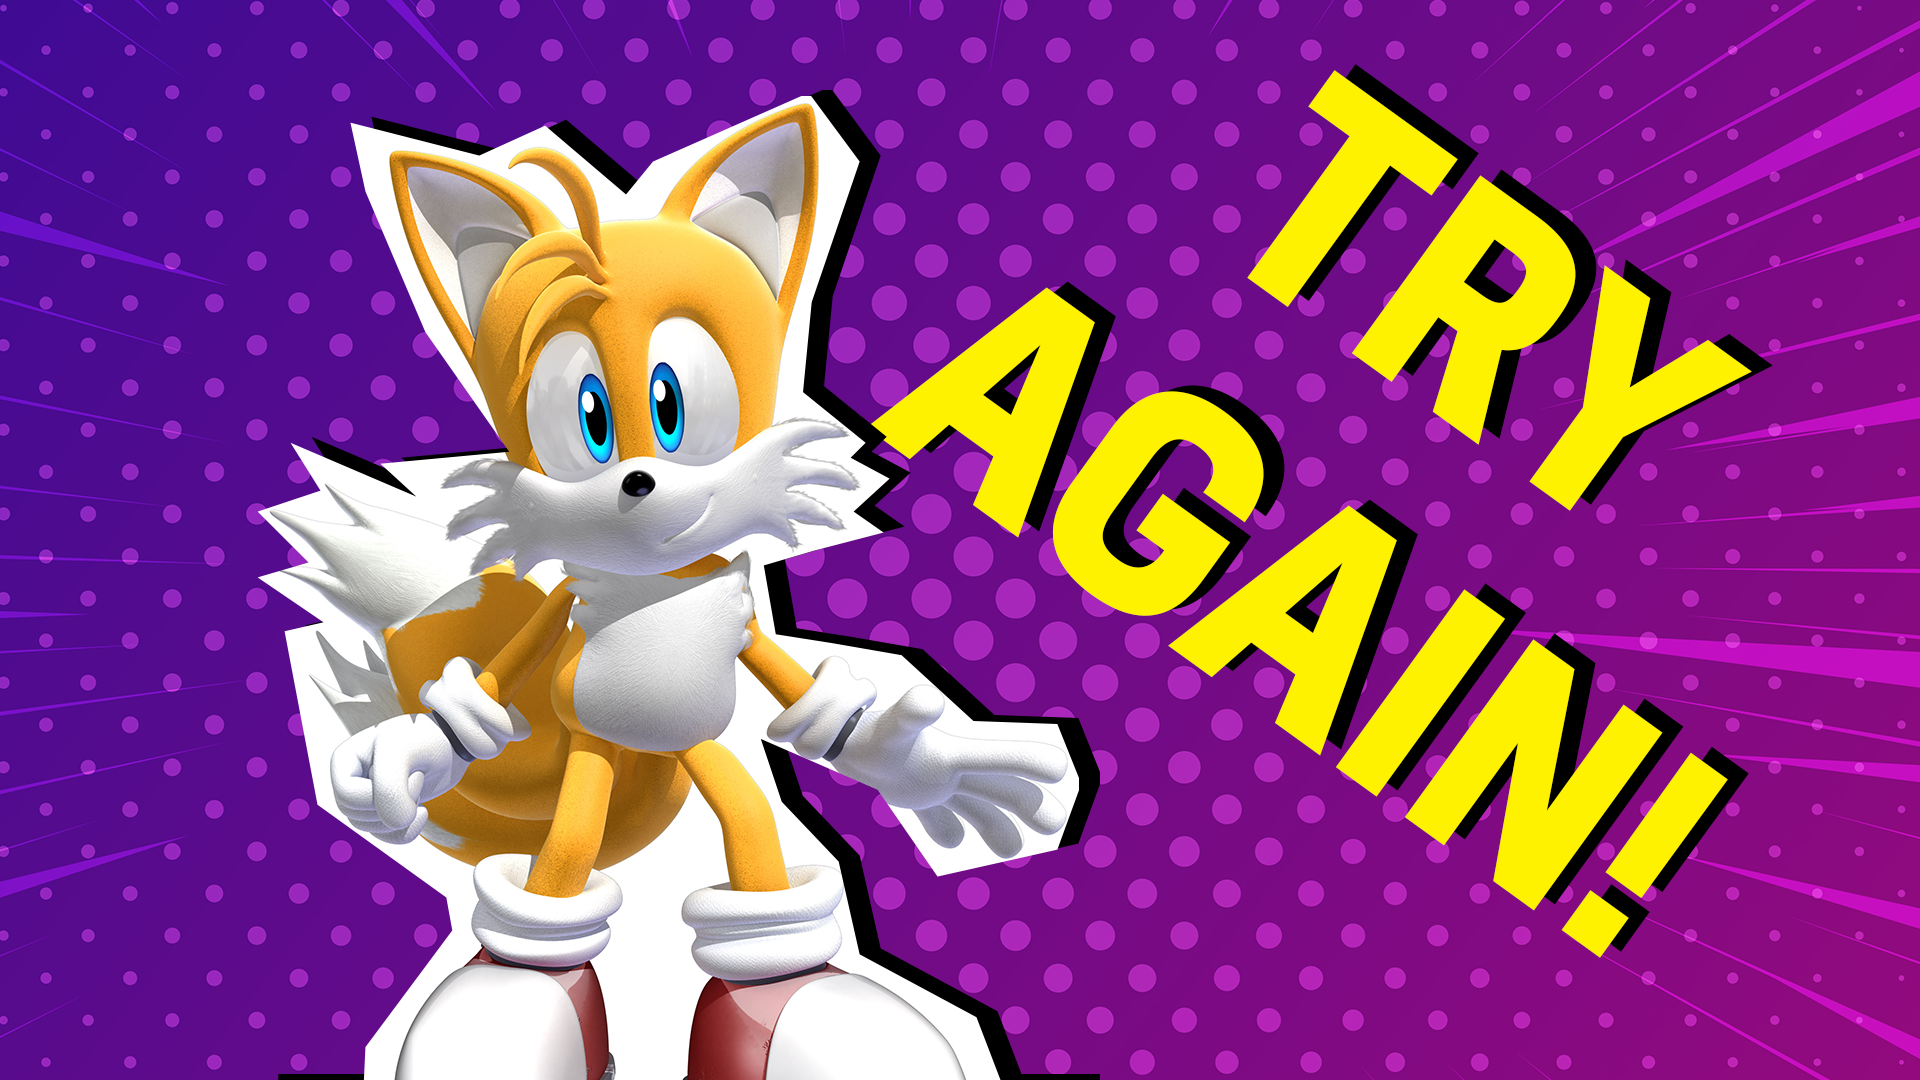 Tails on a purple background with the words try again